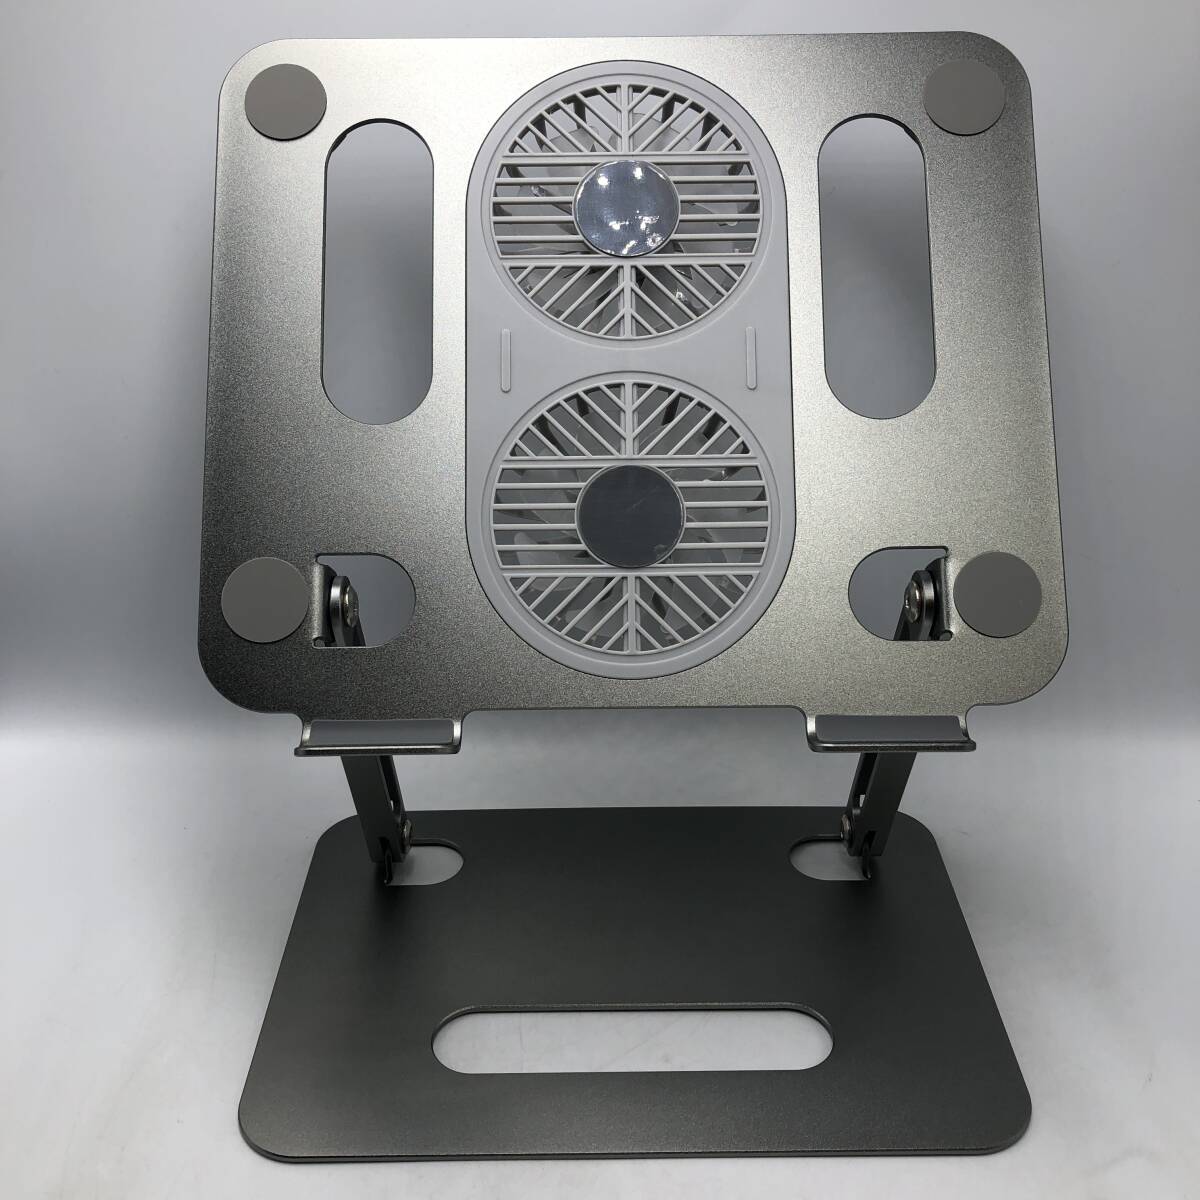 [ electrification verification settled ] laptop cooling pad Note PC cooling pcs laptop stand cooler,air conditioner cool a little over cold folding type /Y20262-D1